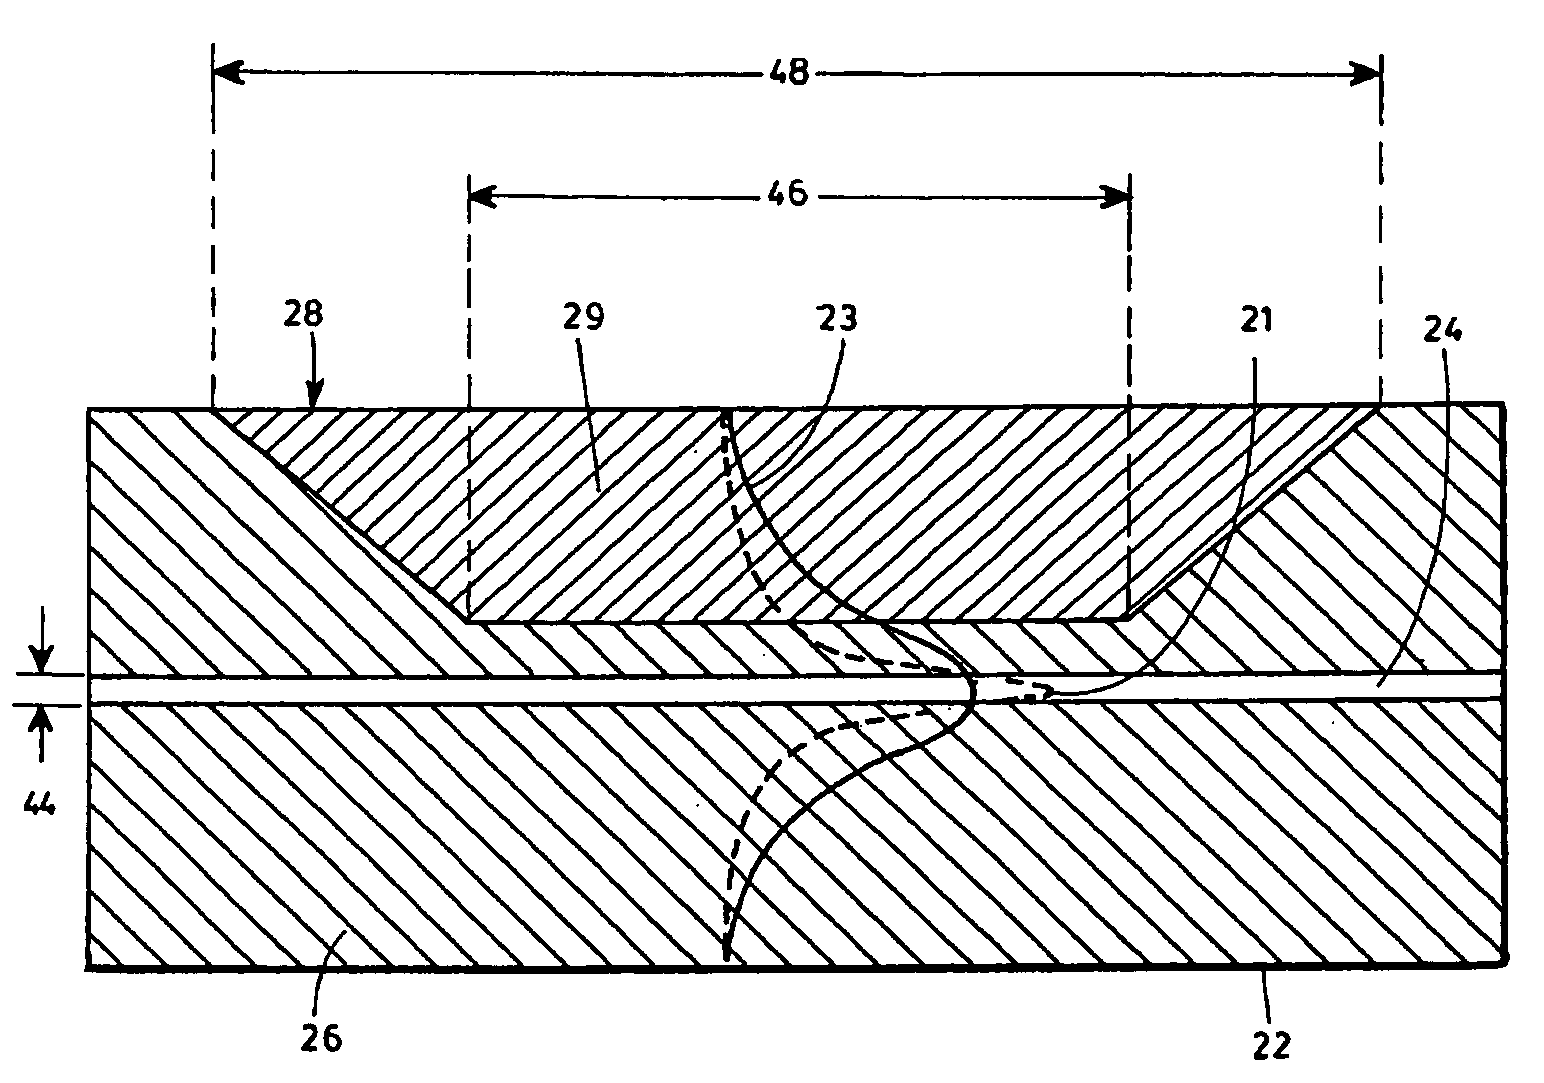 Optical device and method for the spectrally-designed attenuation of a multi-wavelength light signal